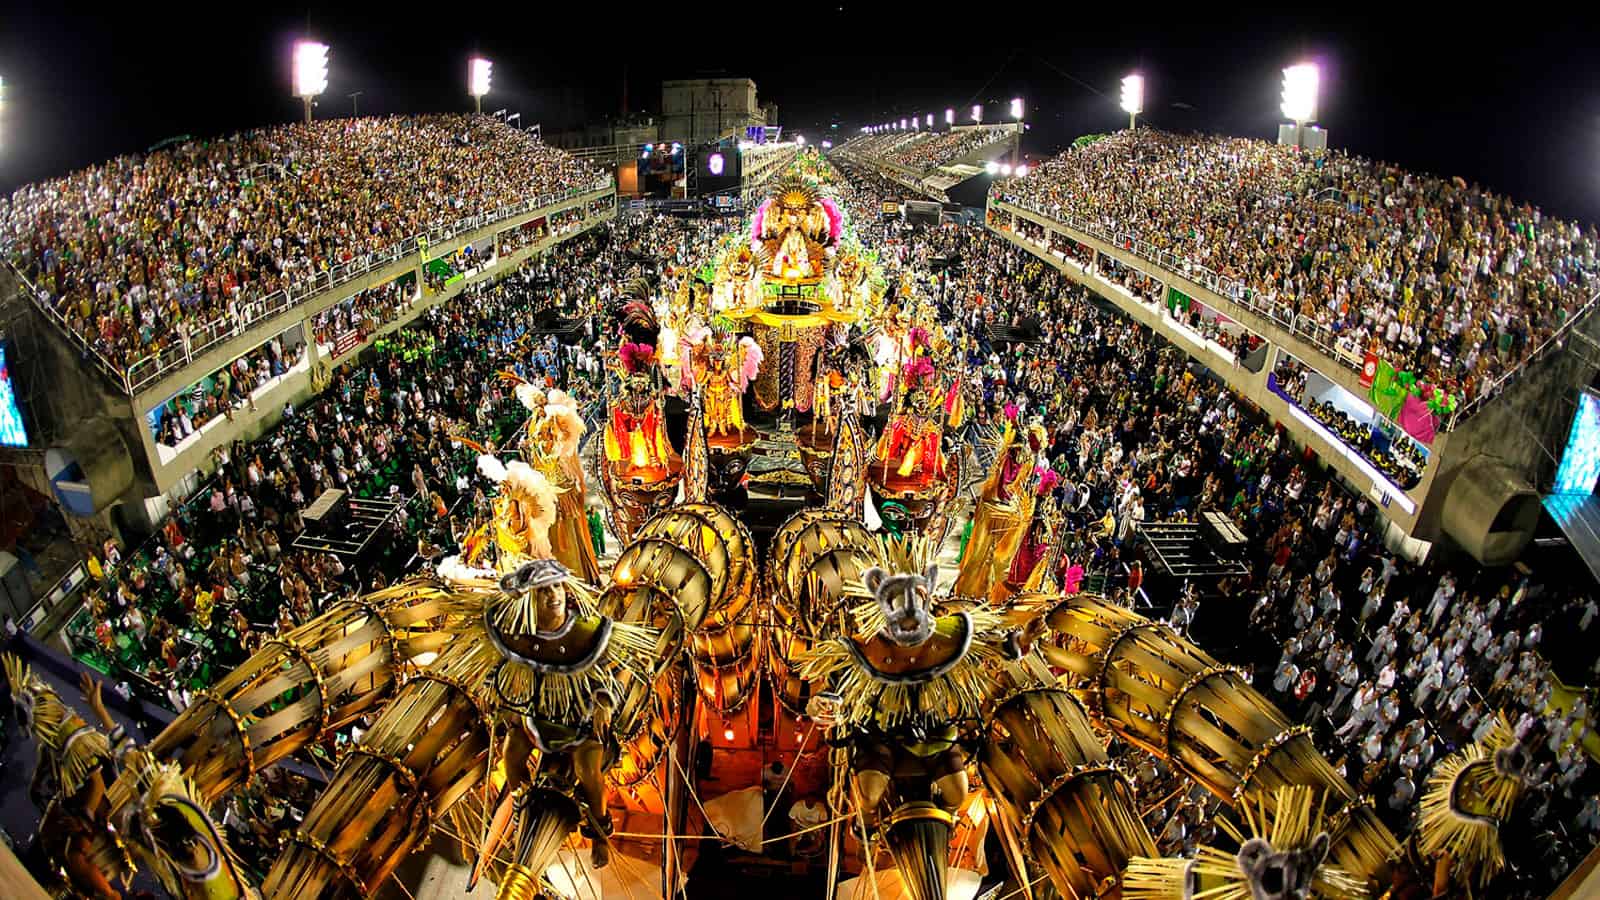 Which Yearly Celebration Claims The Title "The Biggest Carnival In The World"?